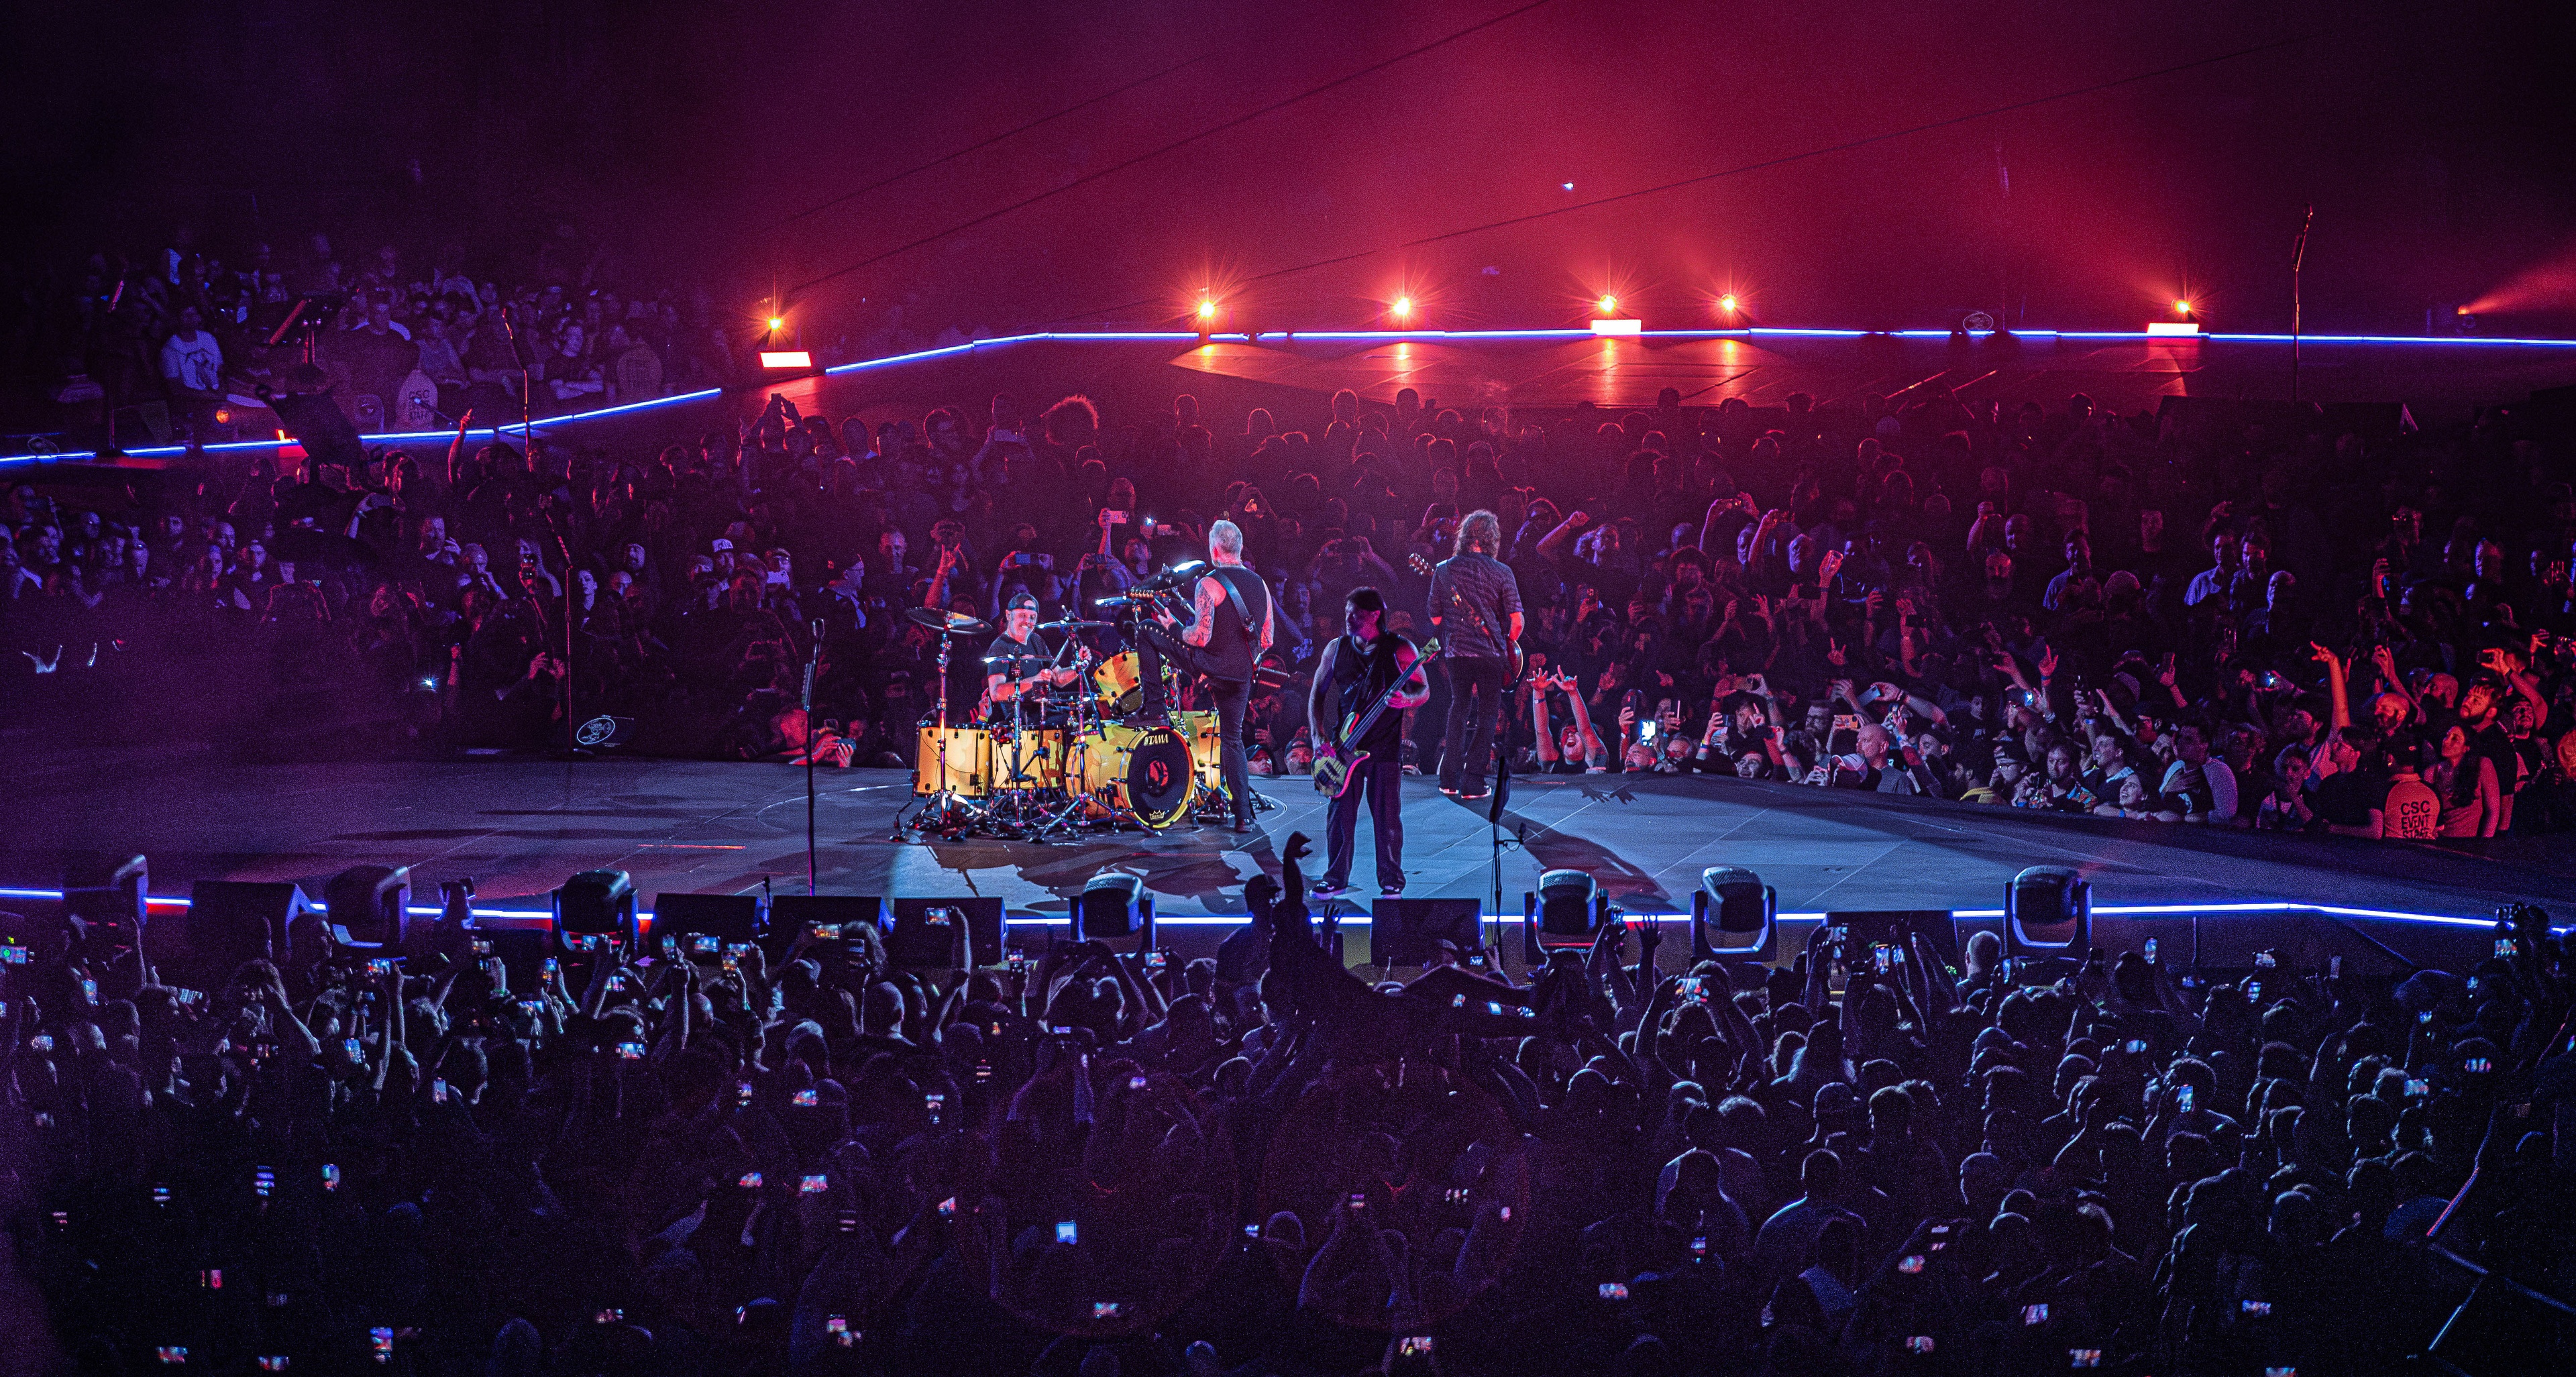 Metallica M72 stage in lit up red surrounded by crowd